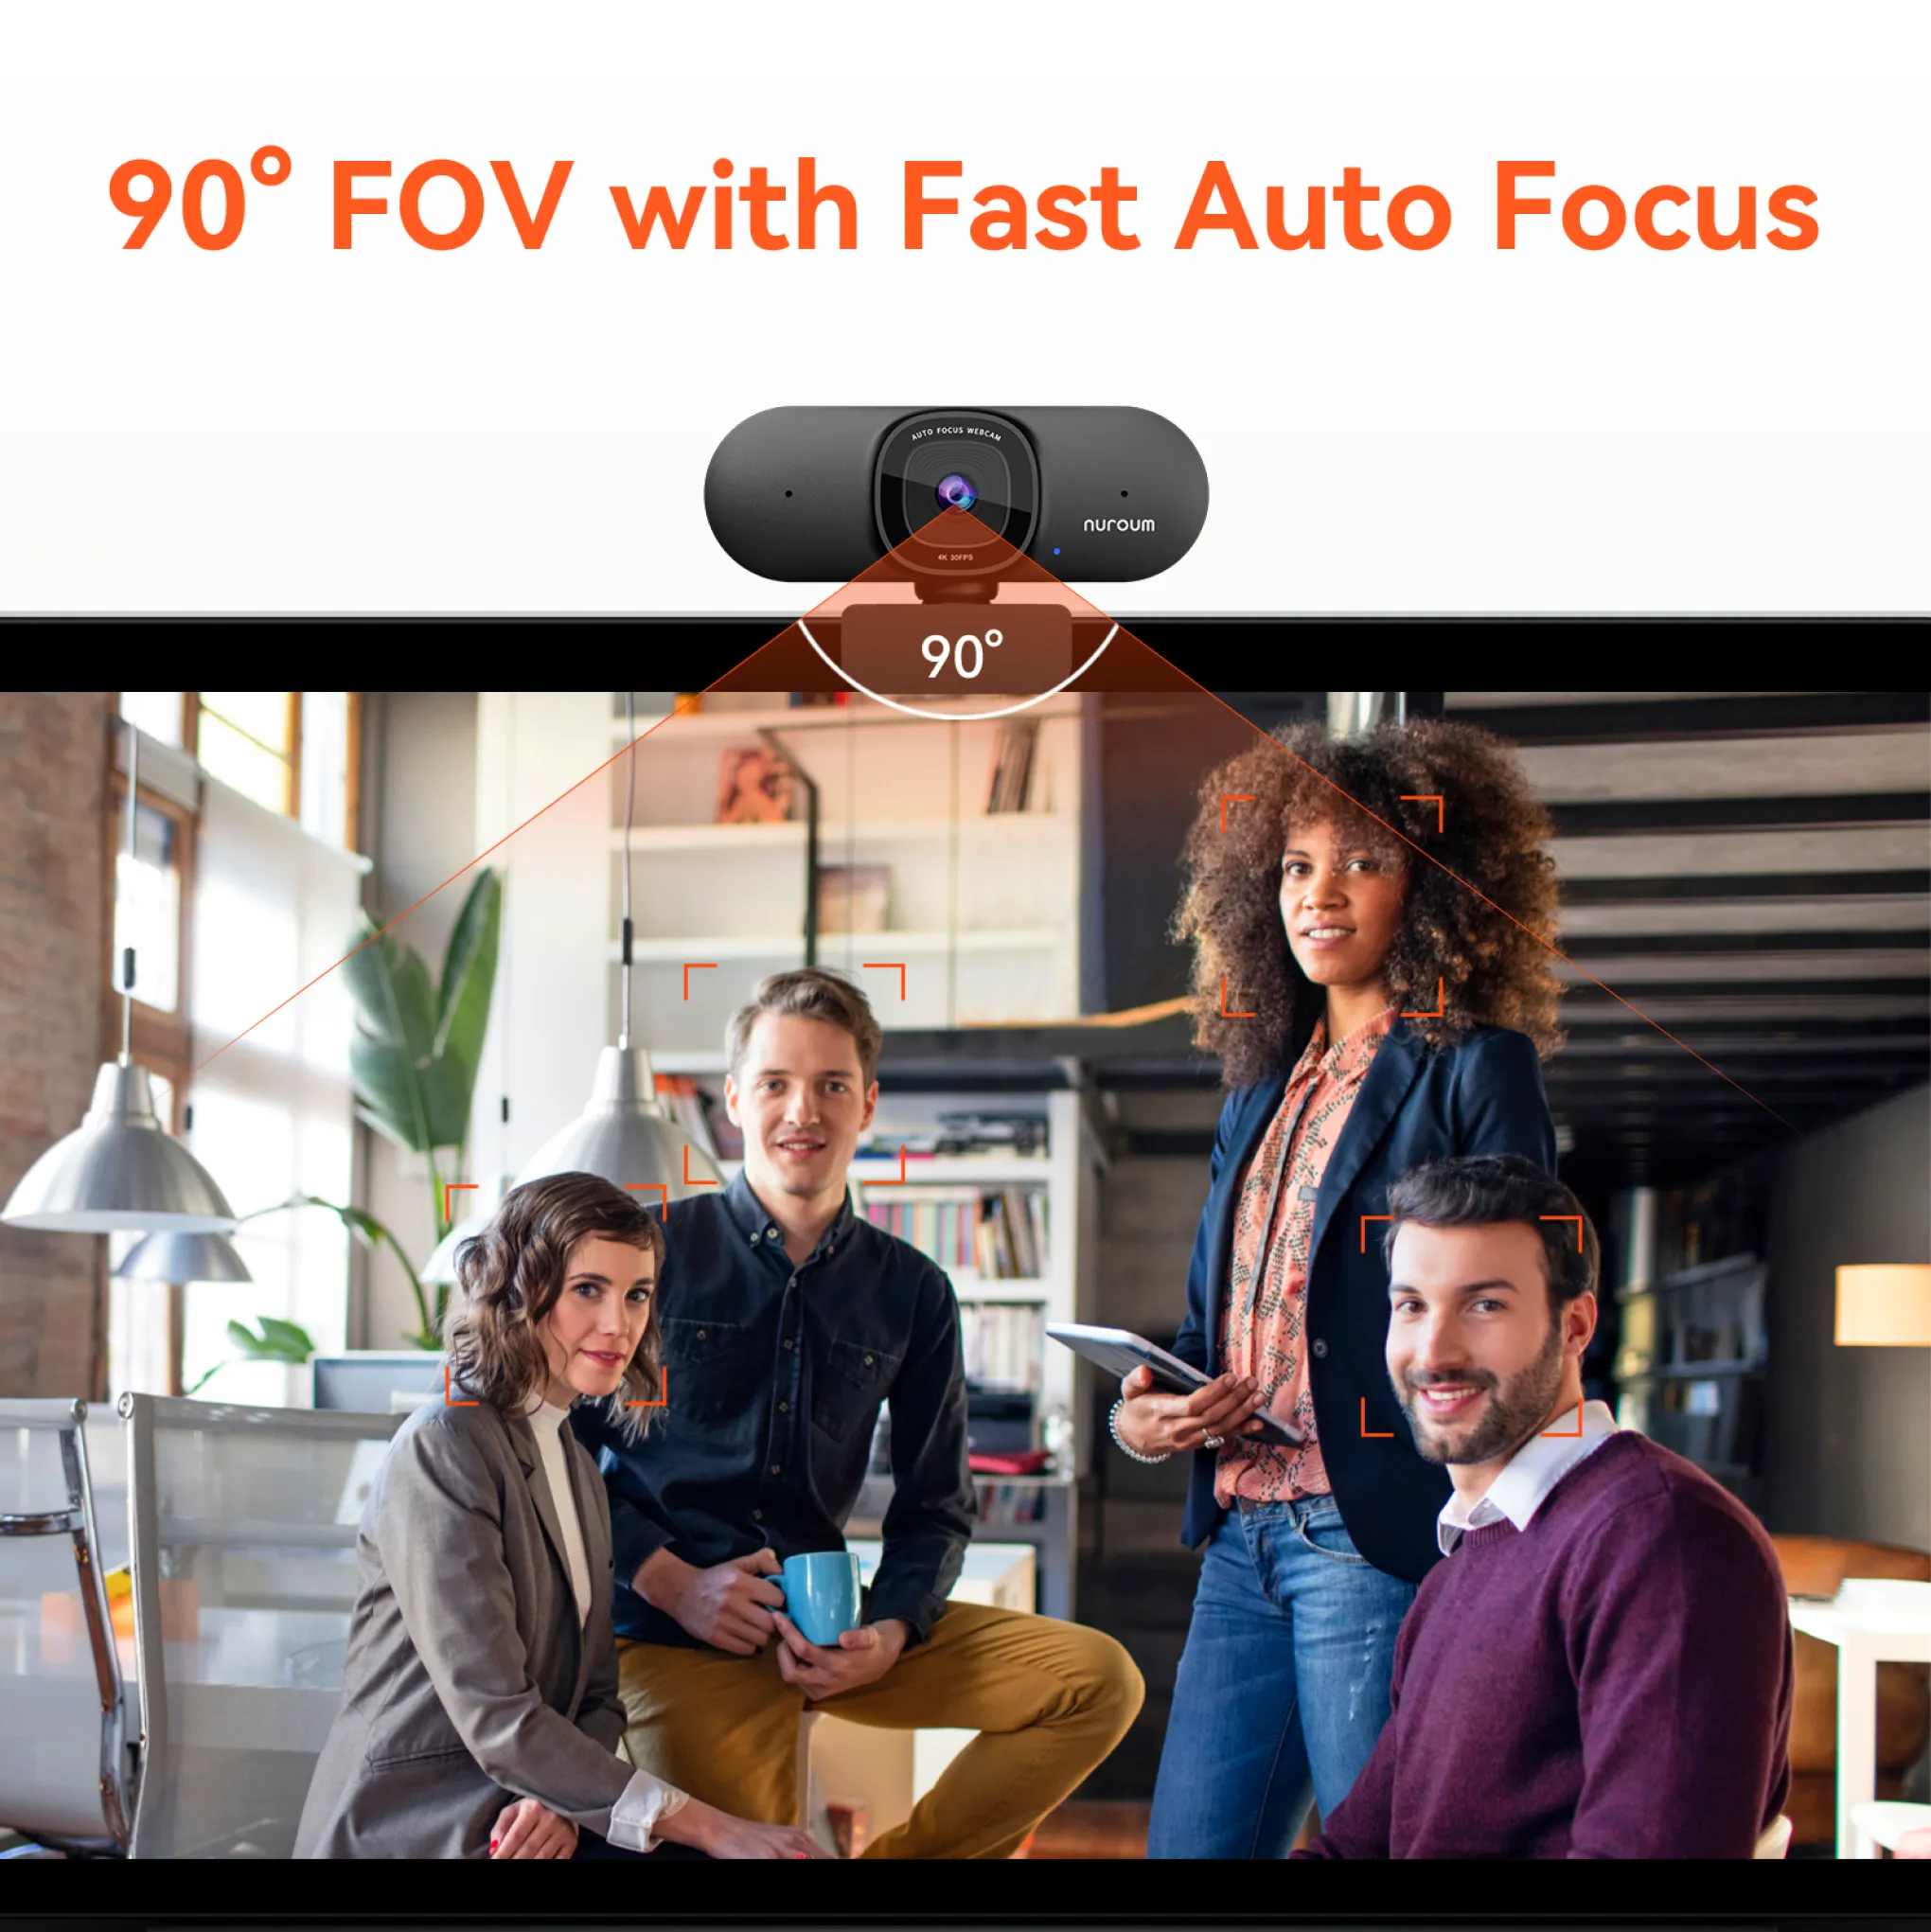 90° FOV with fast auto focus